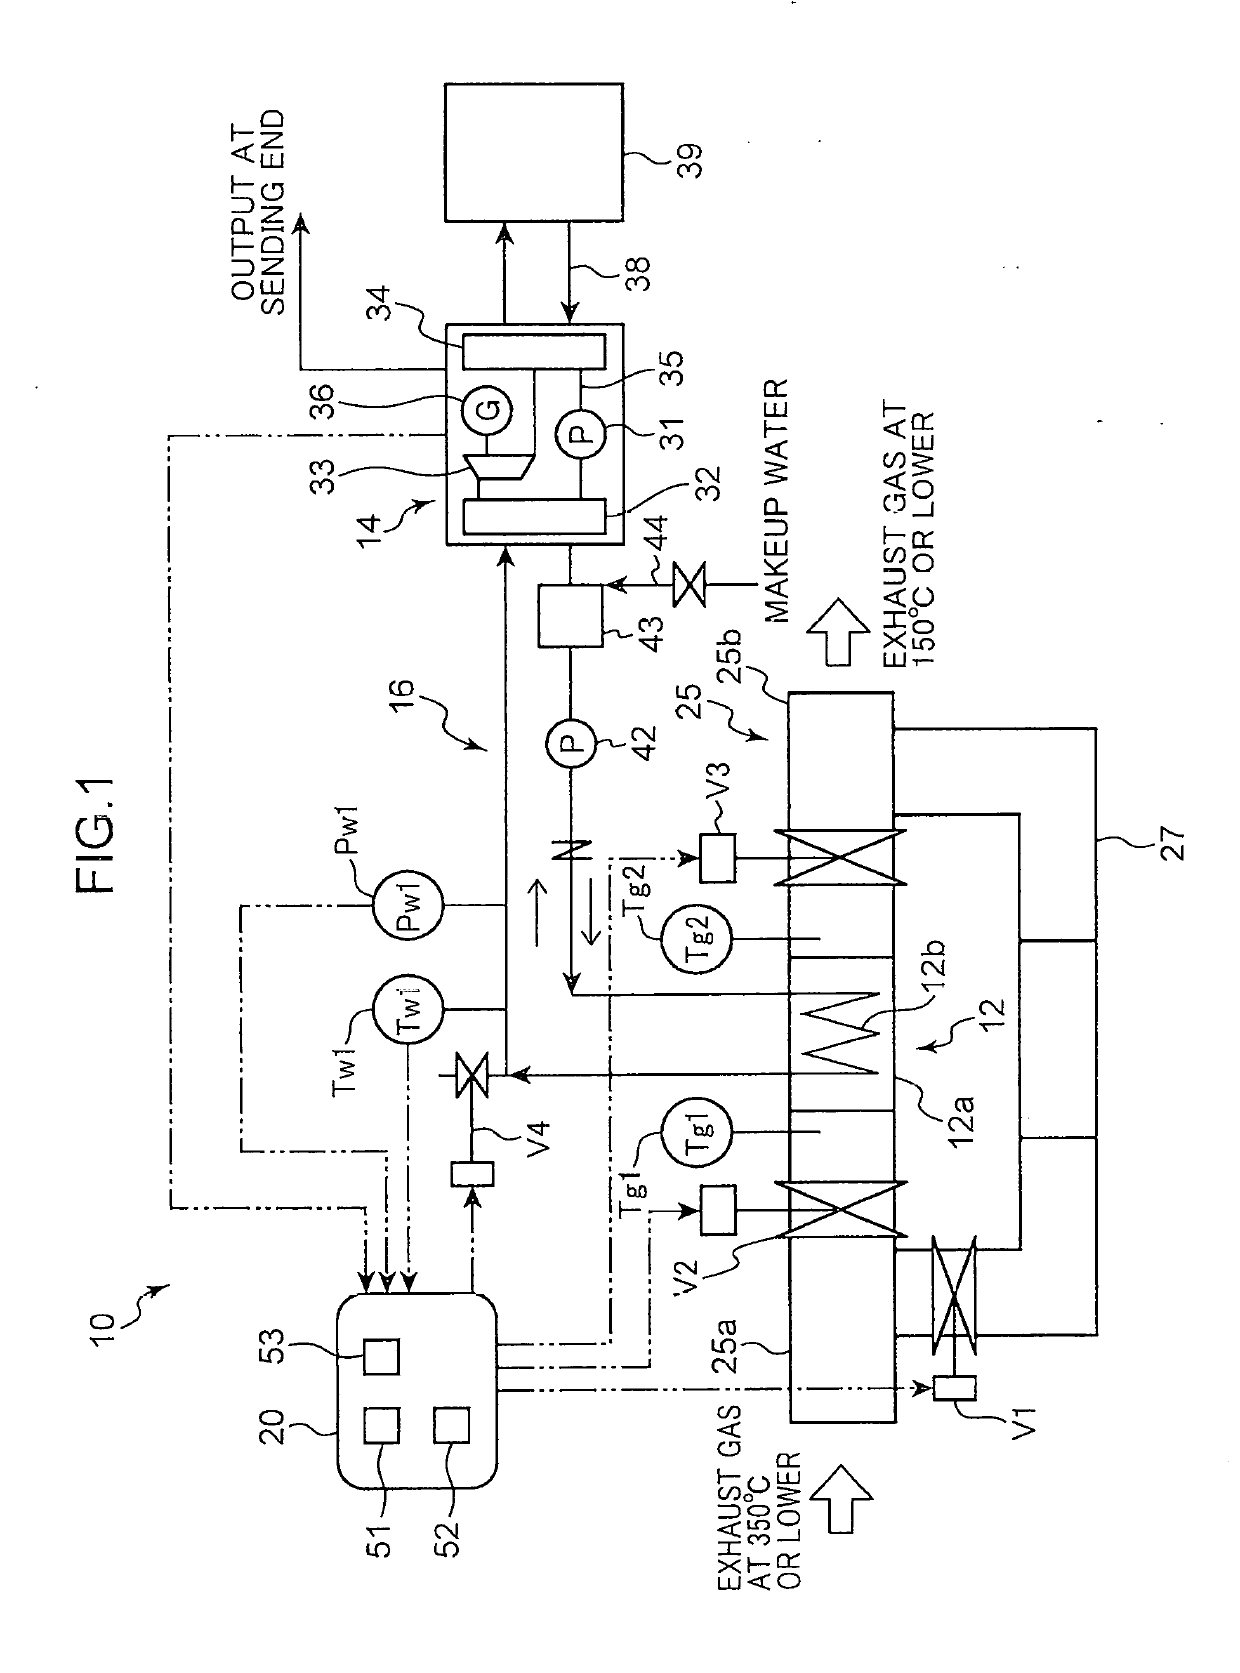 Exhaust heat recovery device and binary electricity generation device